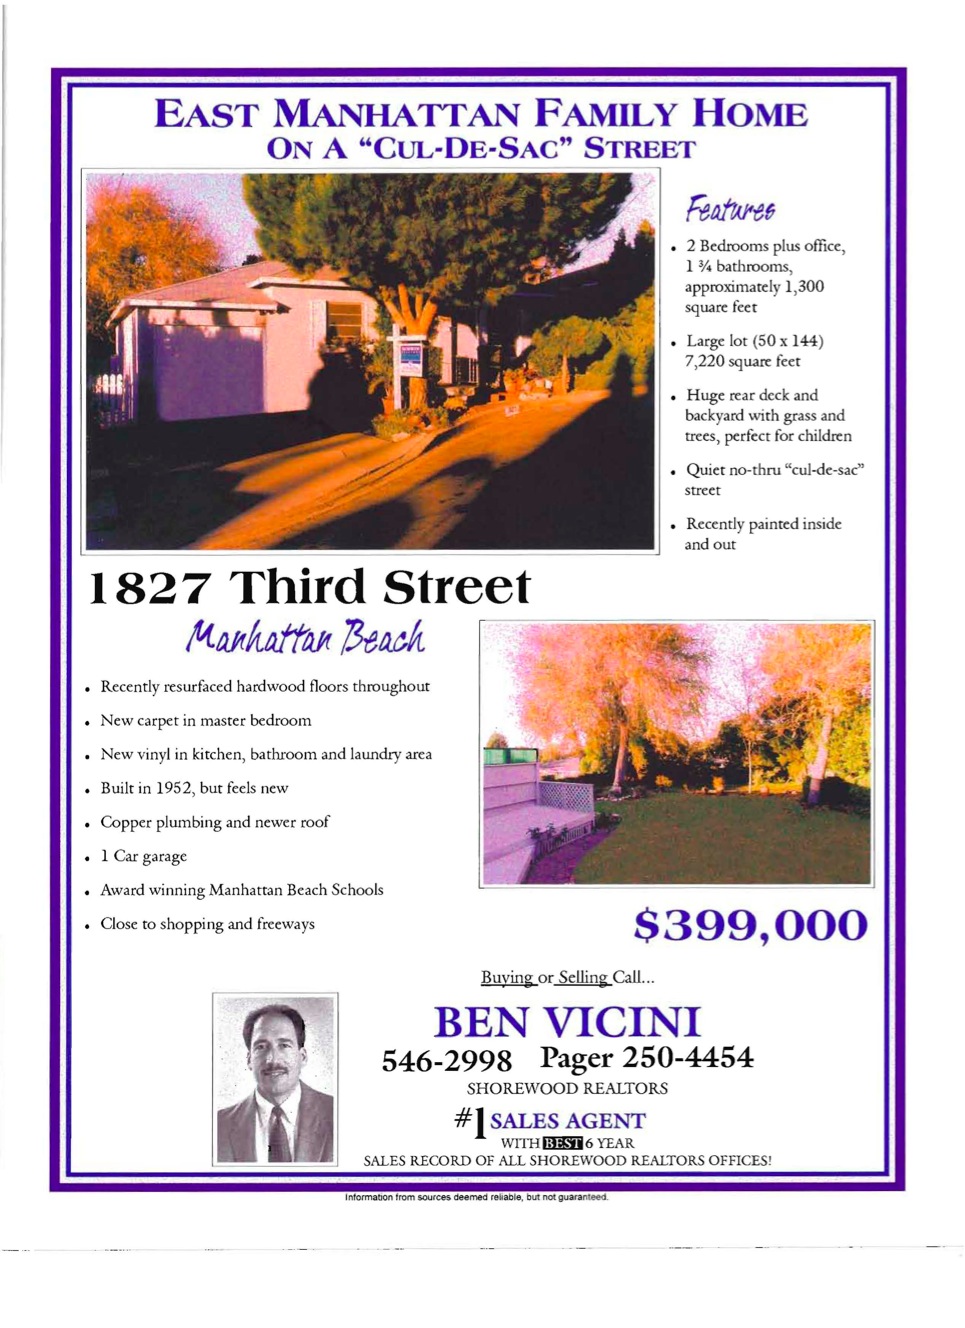 Vicini's Past Listings & Sales_Page_43